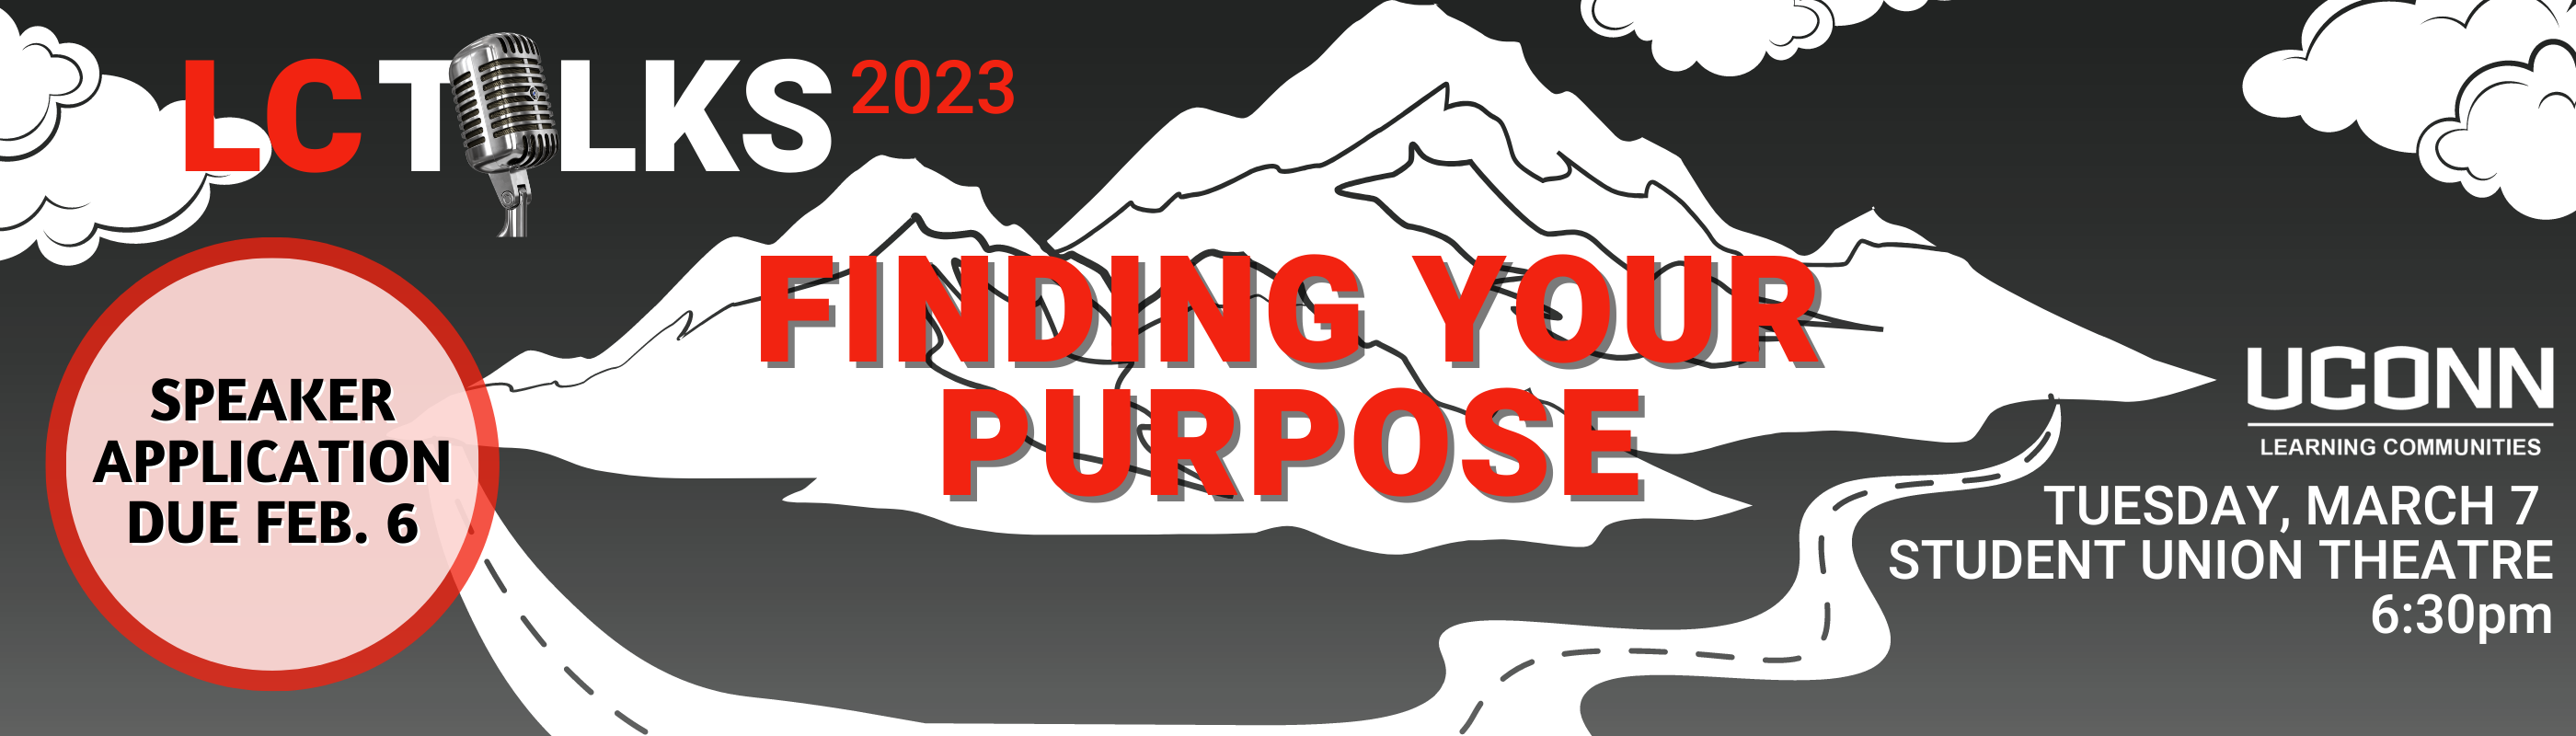 LC TALKS 2023 Finding Your Purpose March 7 in the Student Union Theatre at 6:30pm Call for speakers application closes February 6